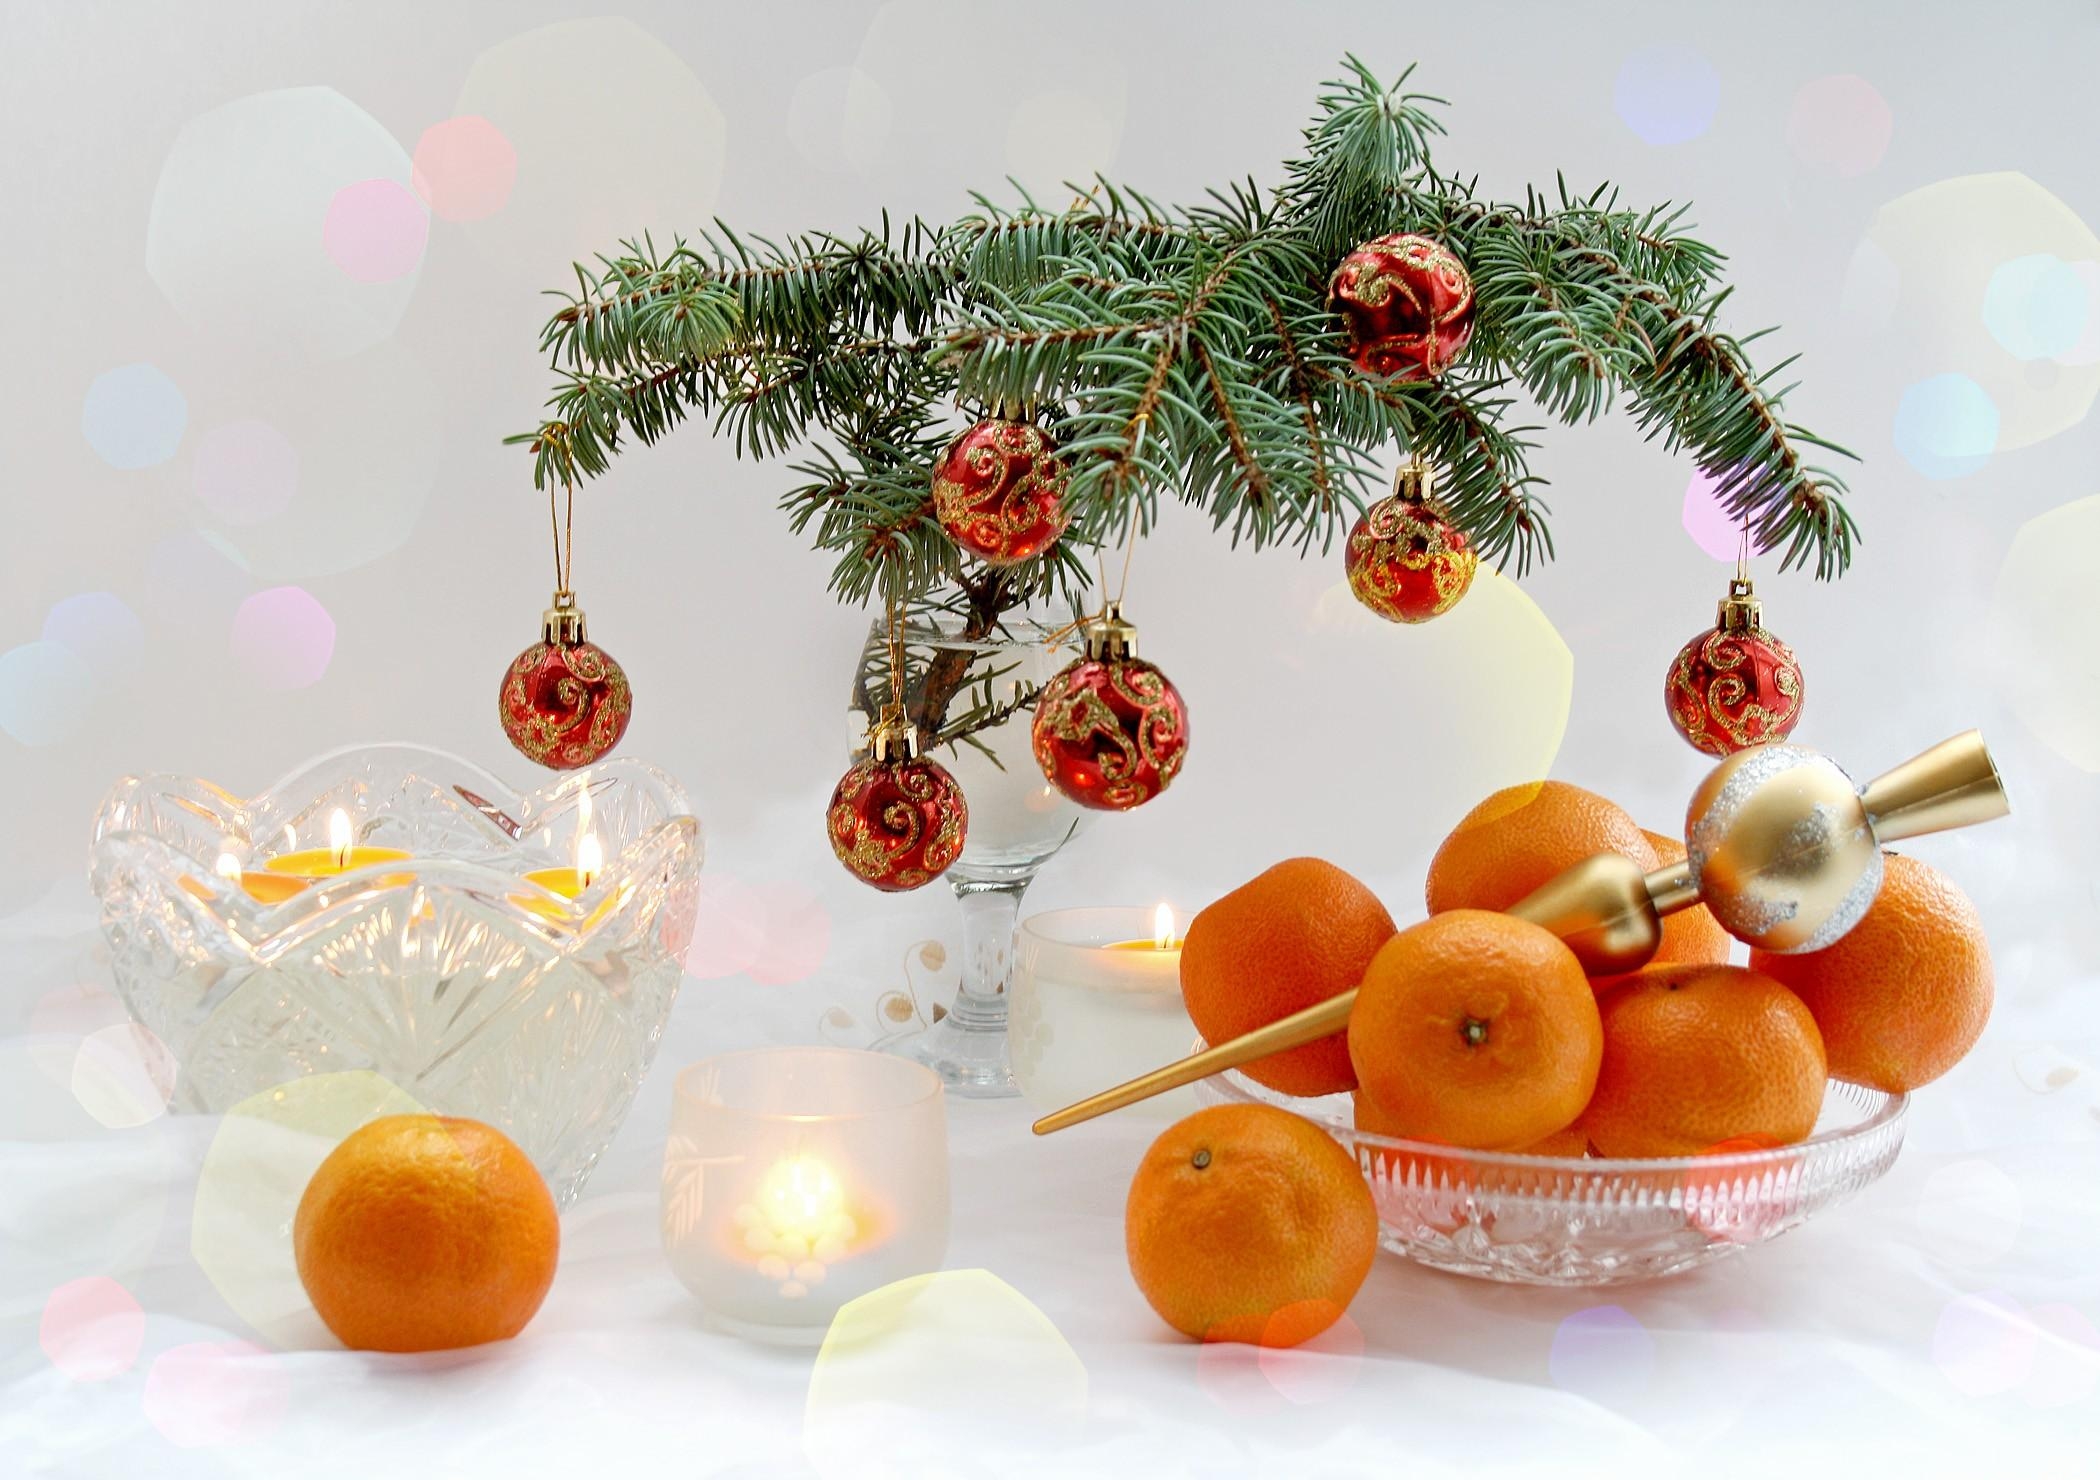 Free Images table, candles, holidays, branch Christmas